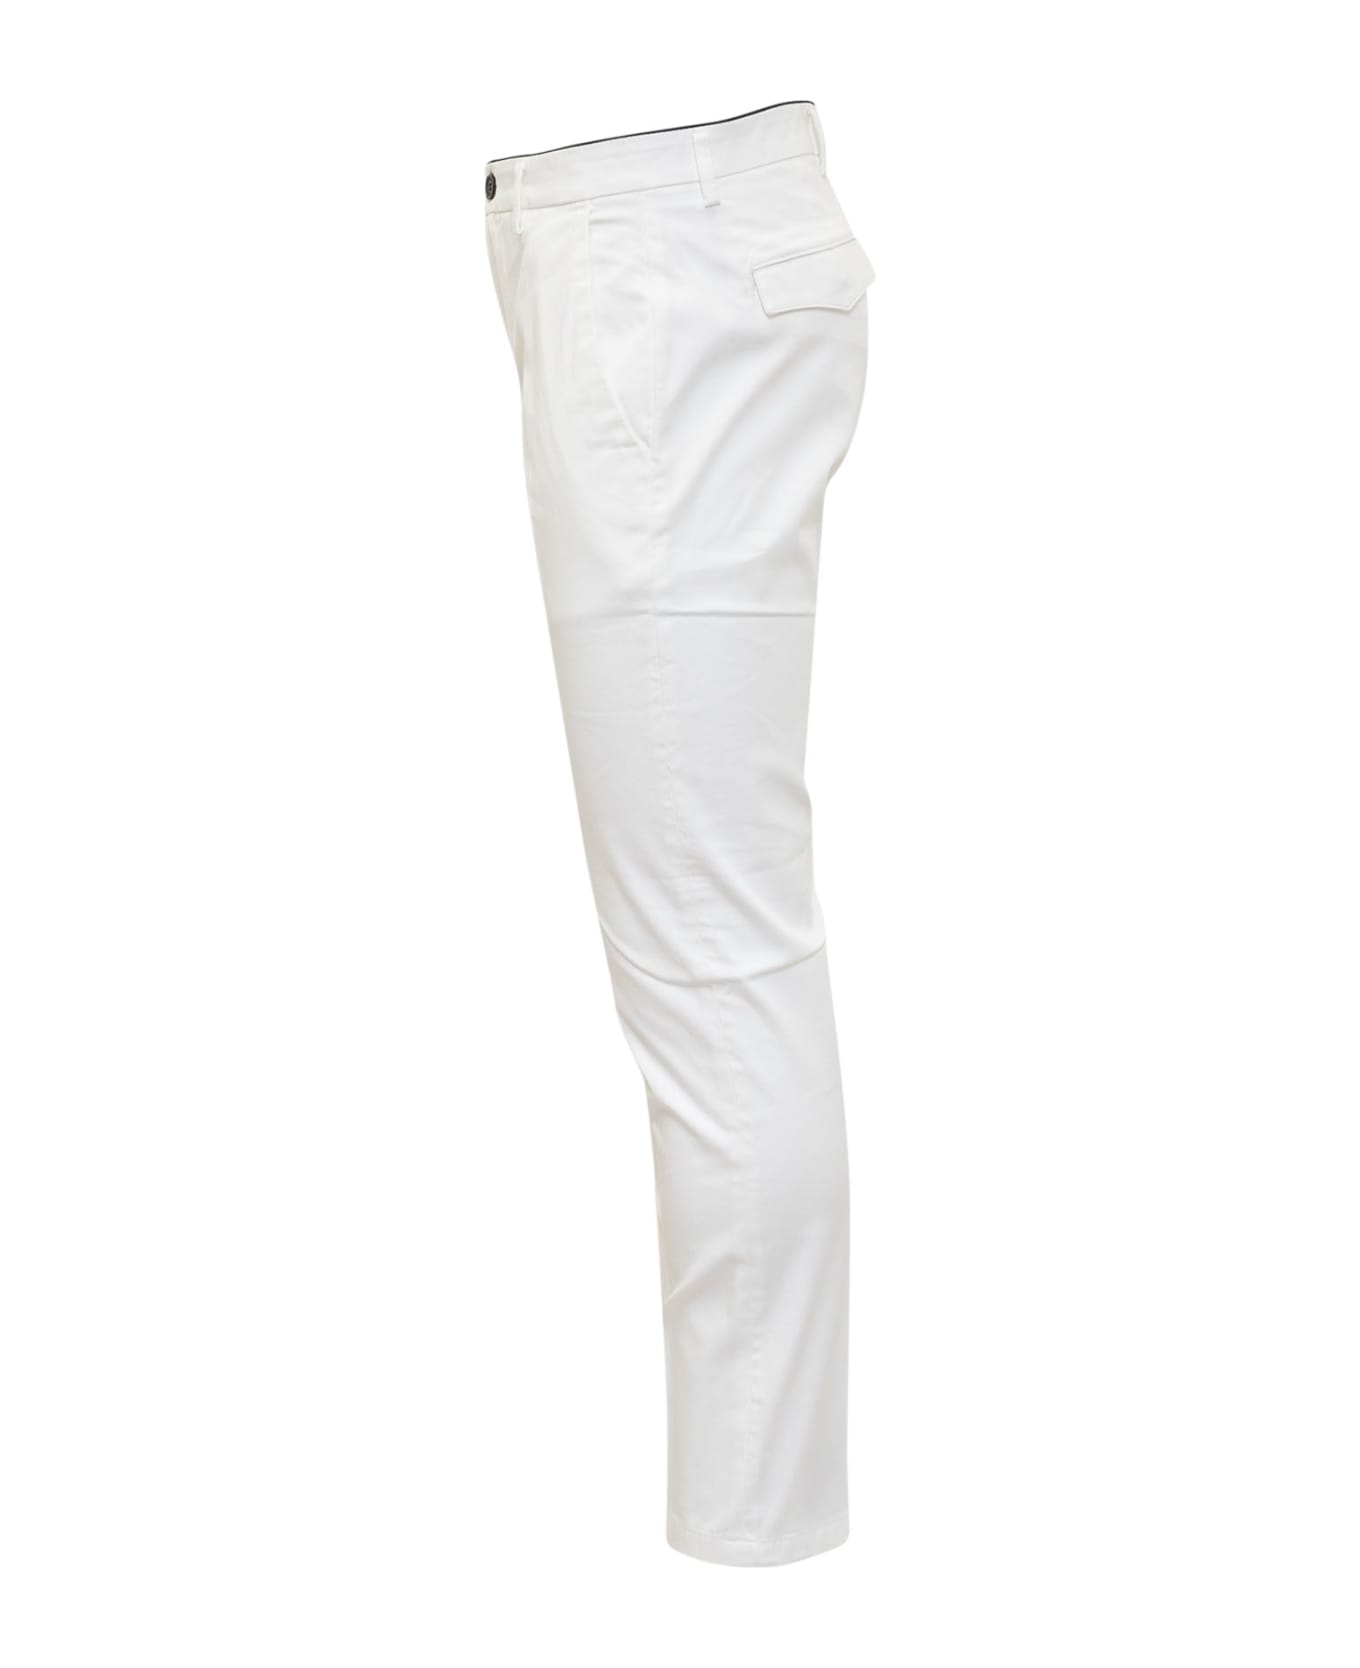 Department Five Prince Chinos Pants - BIANCO